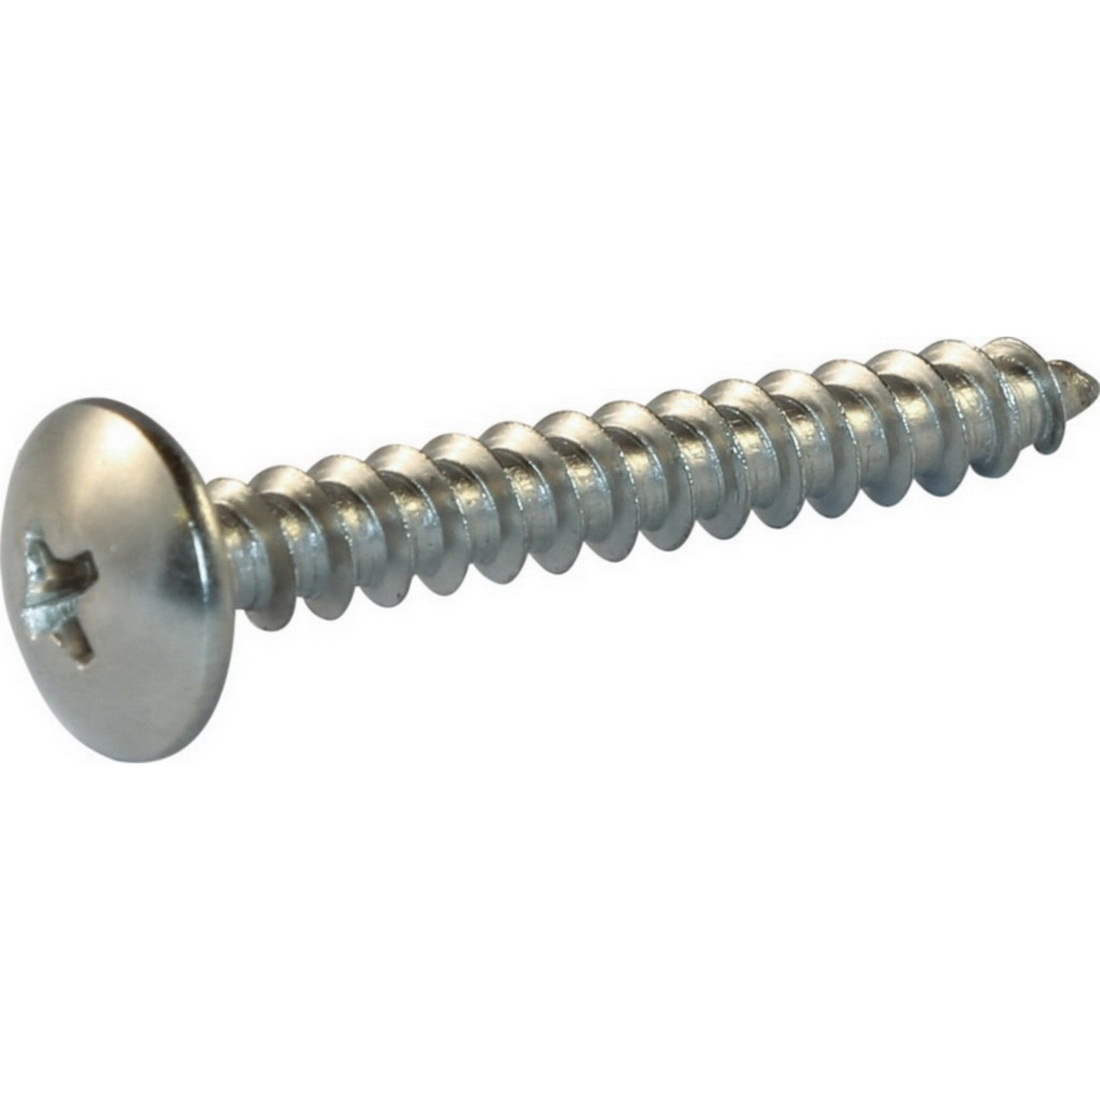 Self Tapping Screw 10g X 50mm Pan Head Square Drive T302 Stainless Steel Spqt4052002 Product 